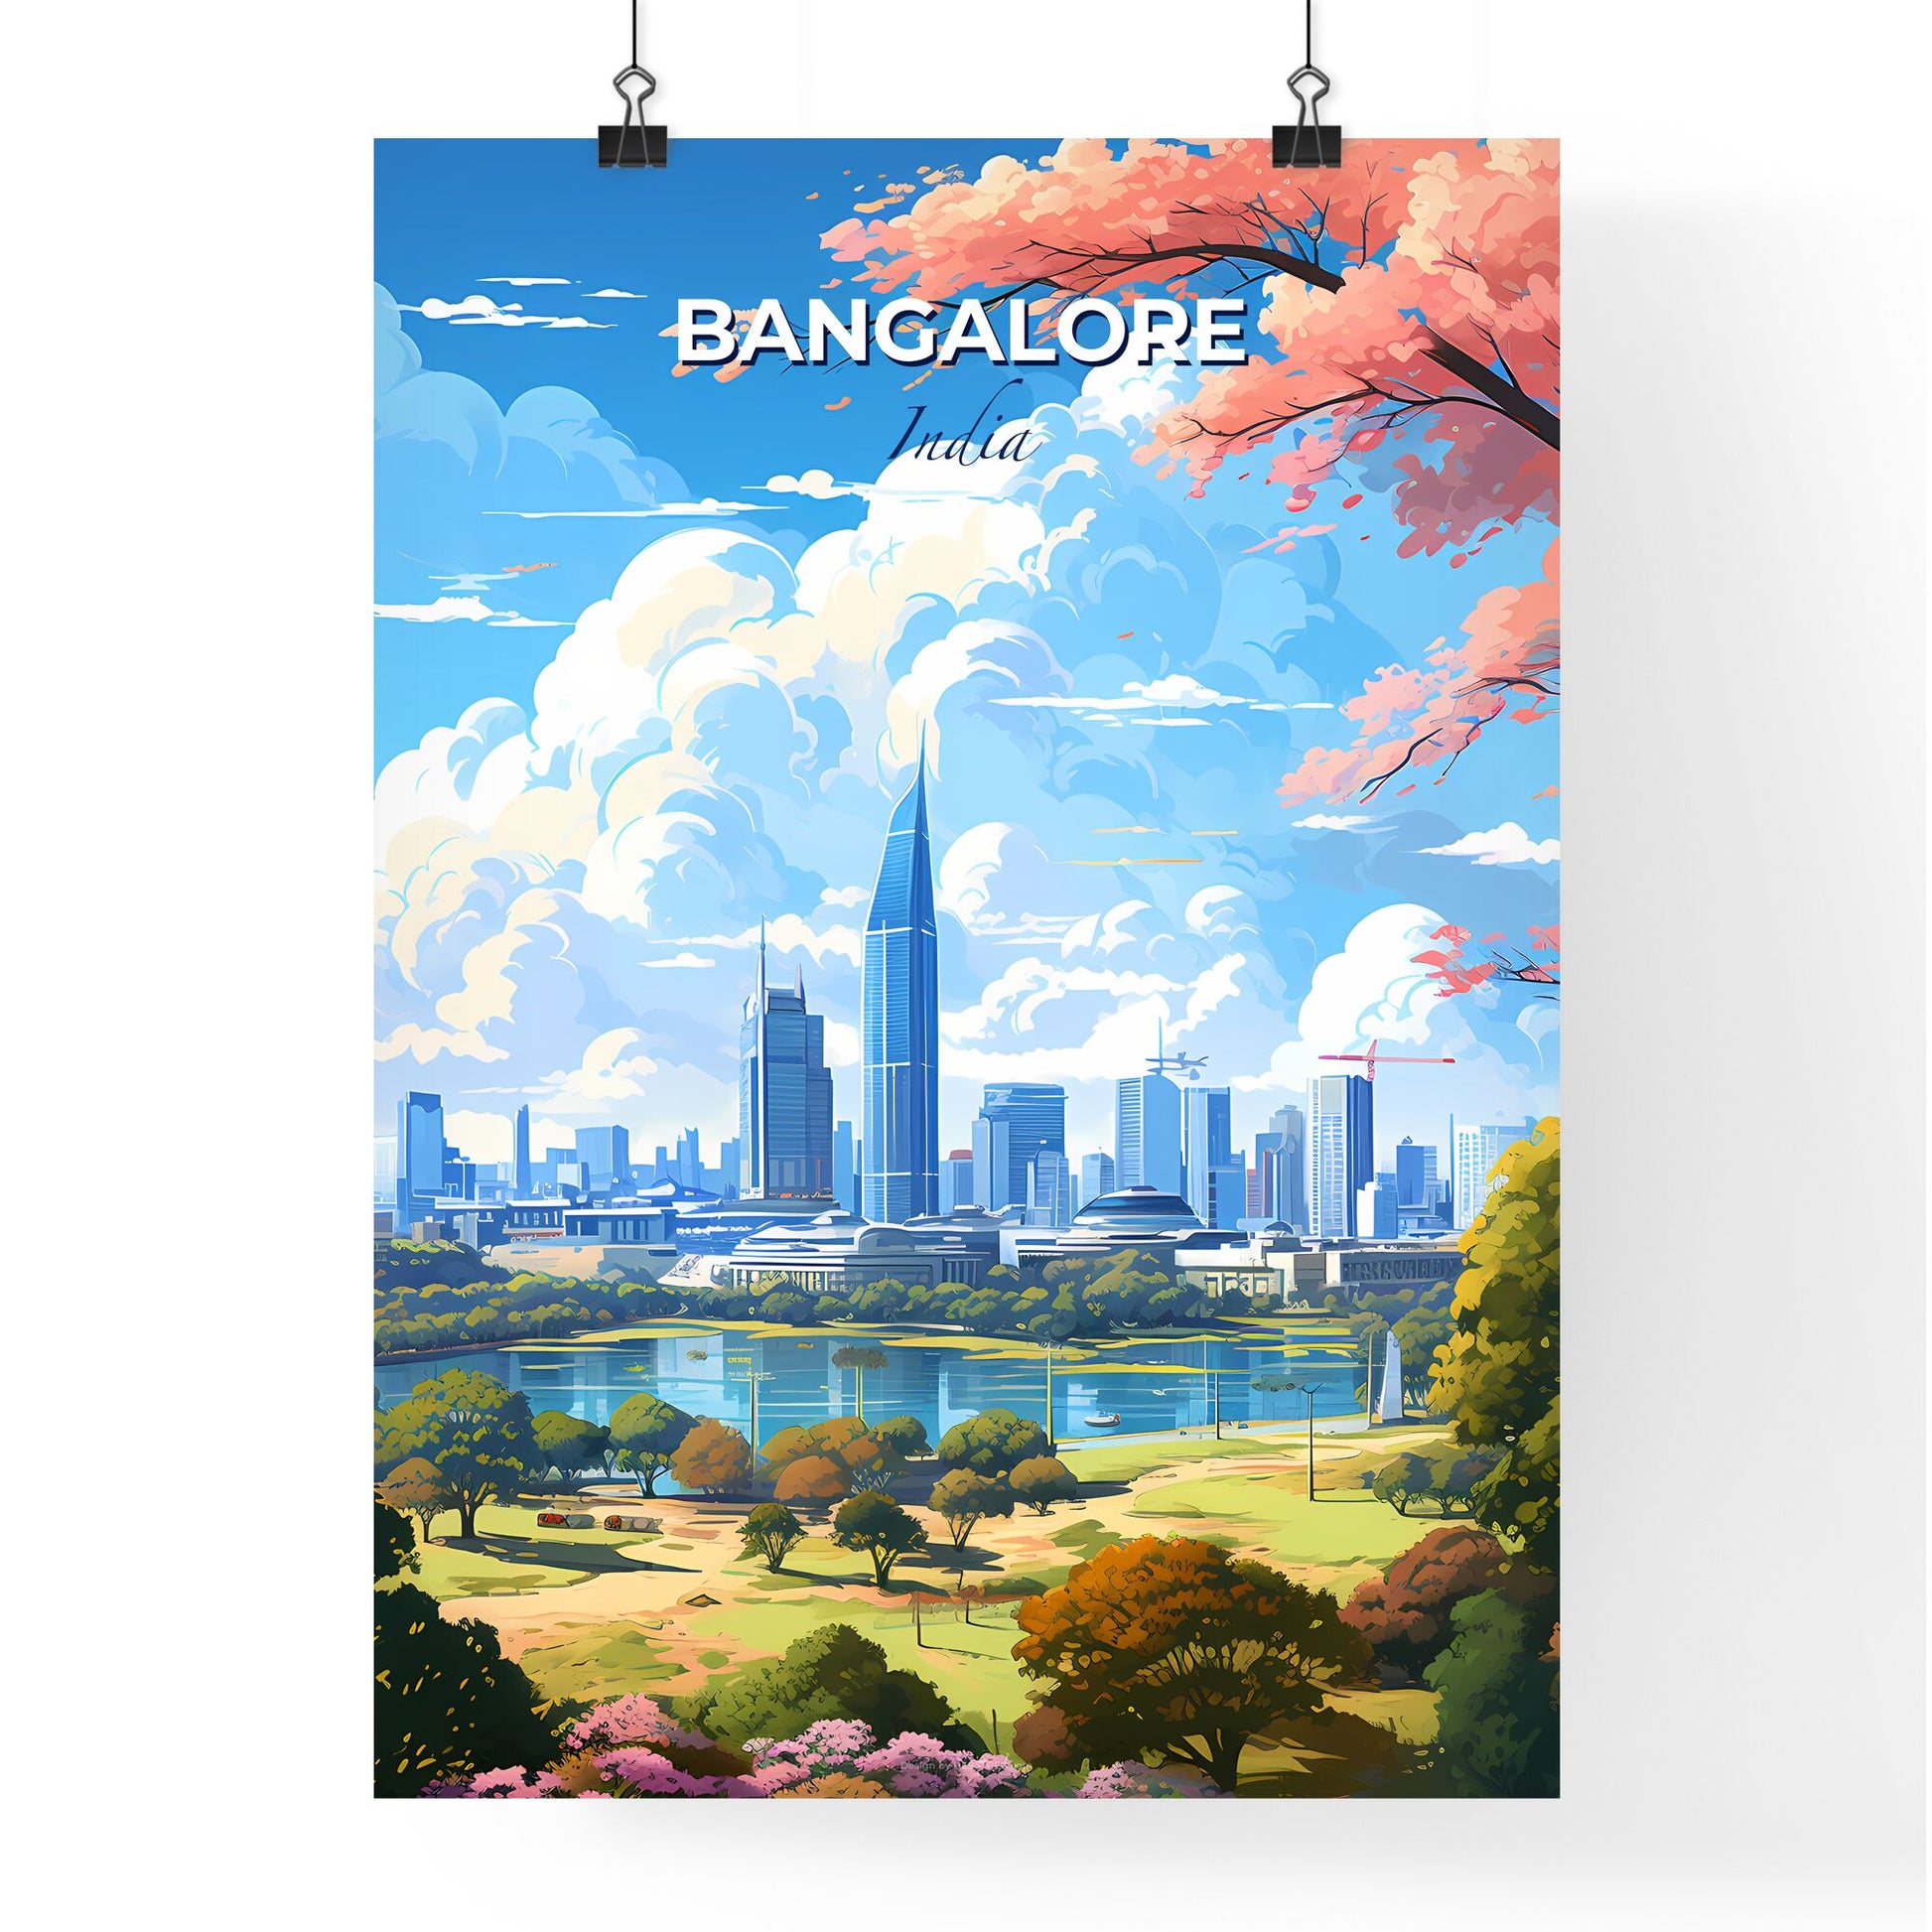 Bangalore India Skyline - A City Landscape With Trees And A River - Customizable Travel Gift Default Title